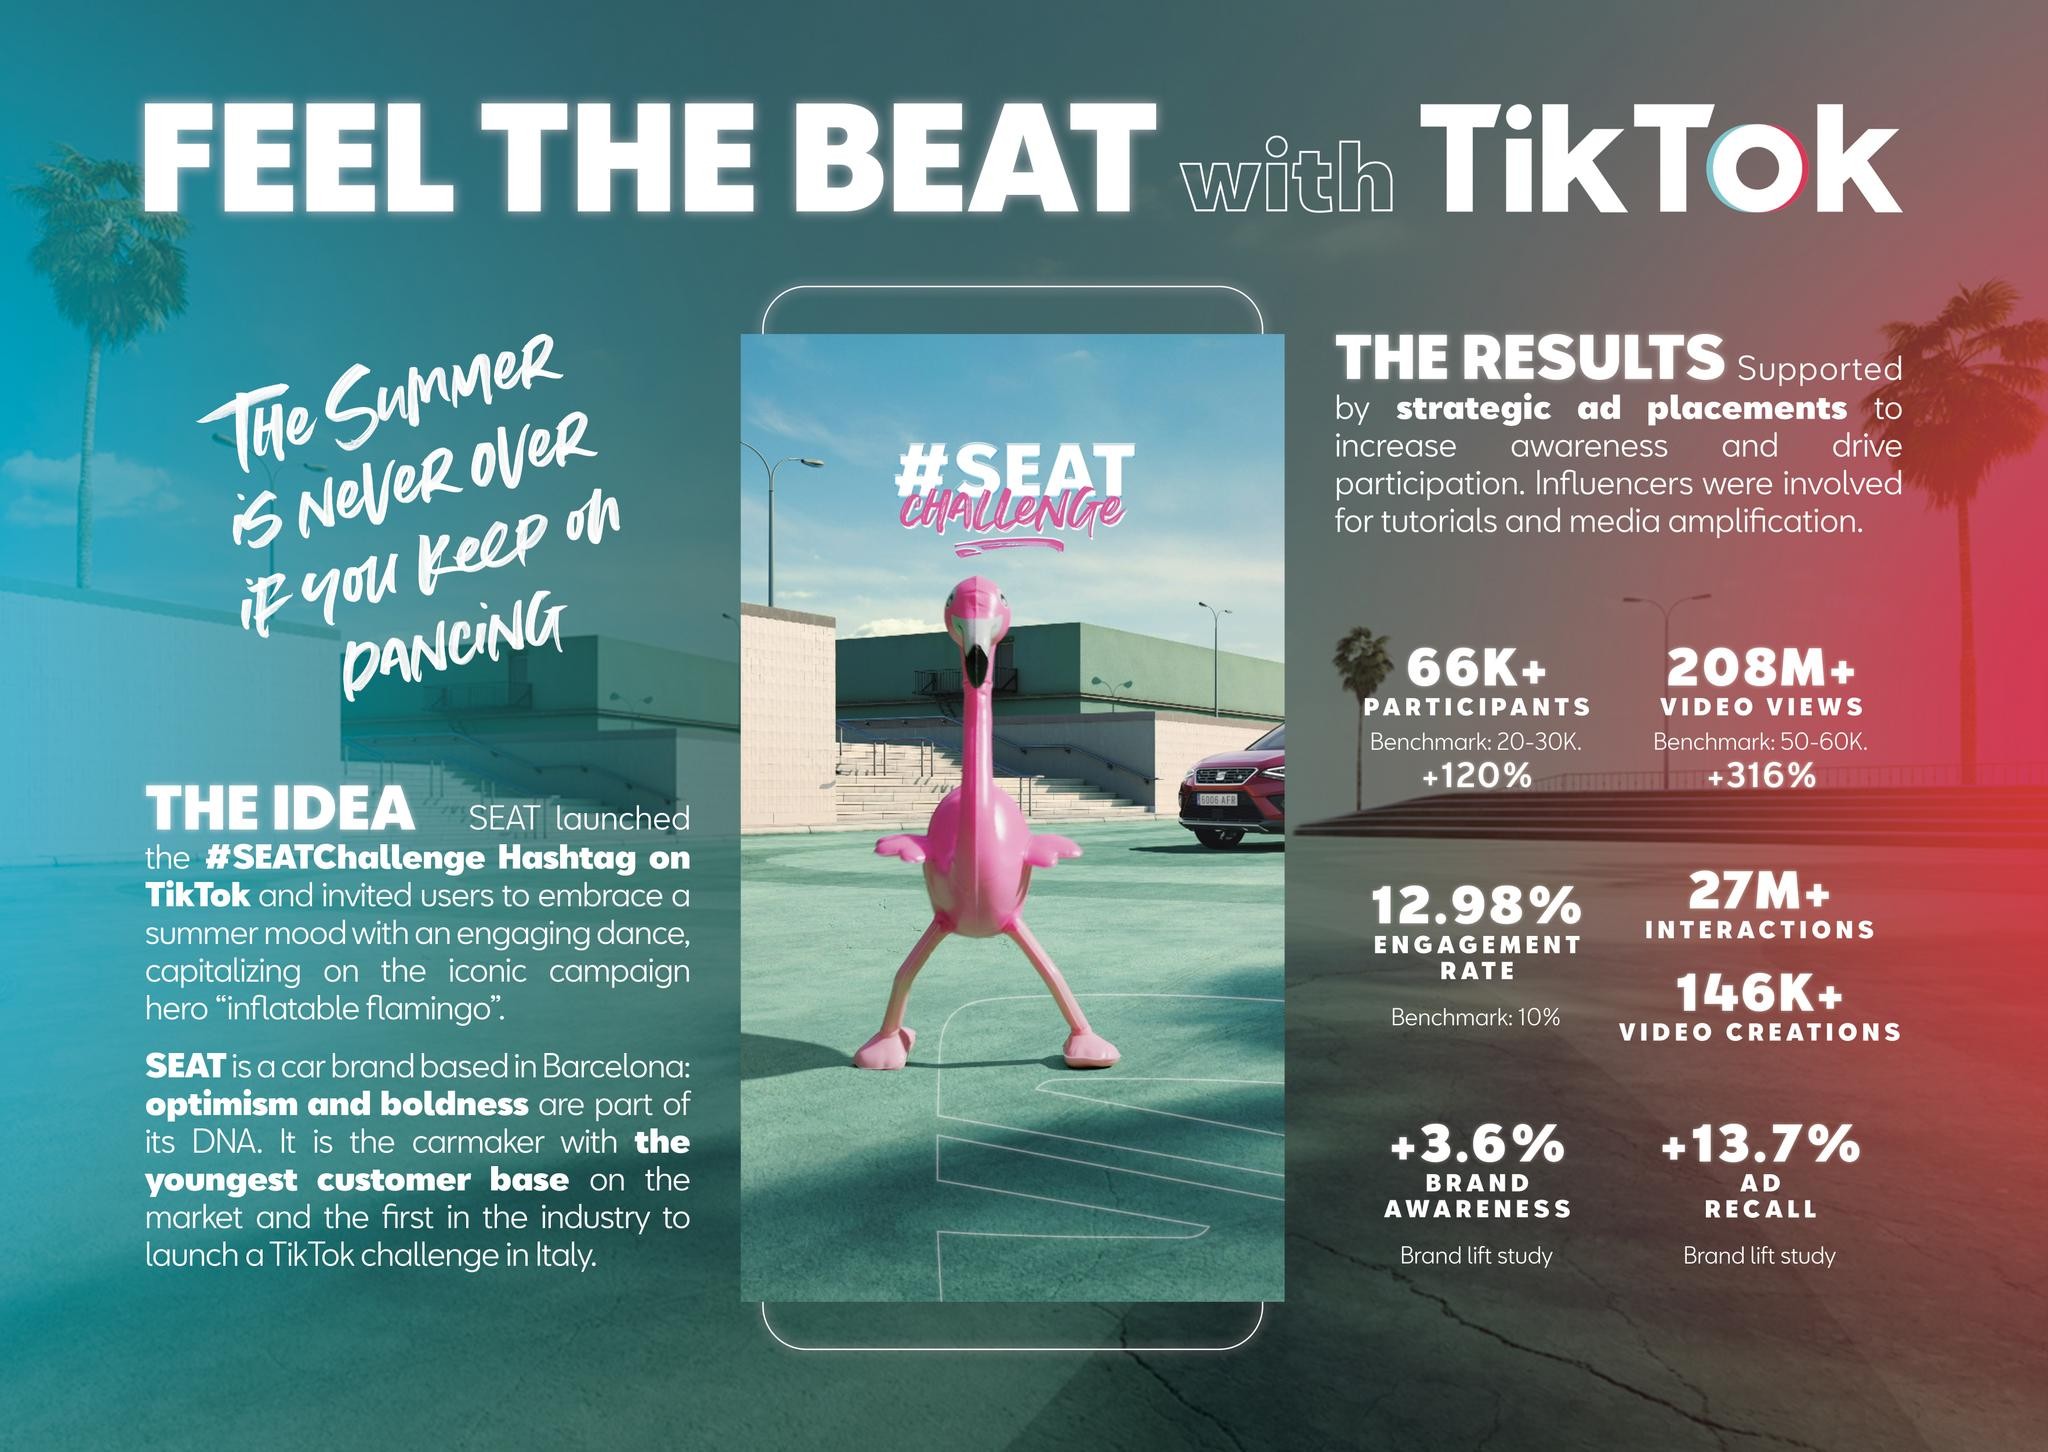 FEEL THE BEAT WITH TIK TOK